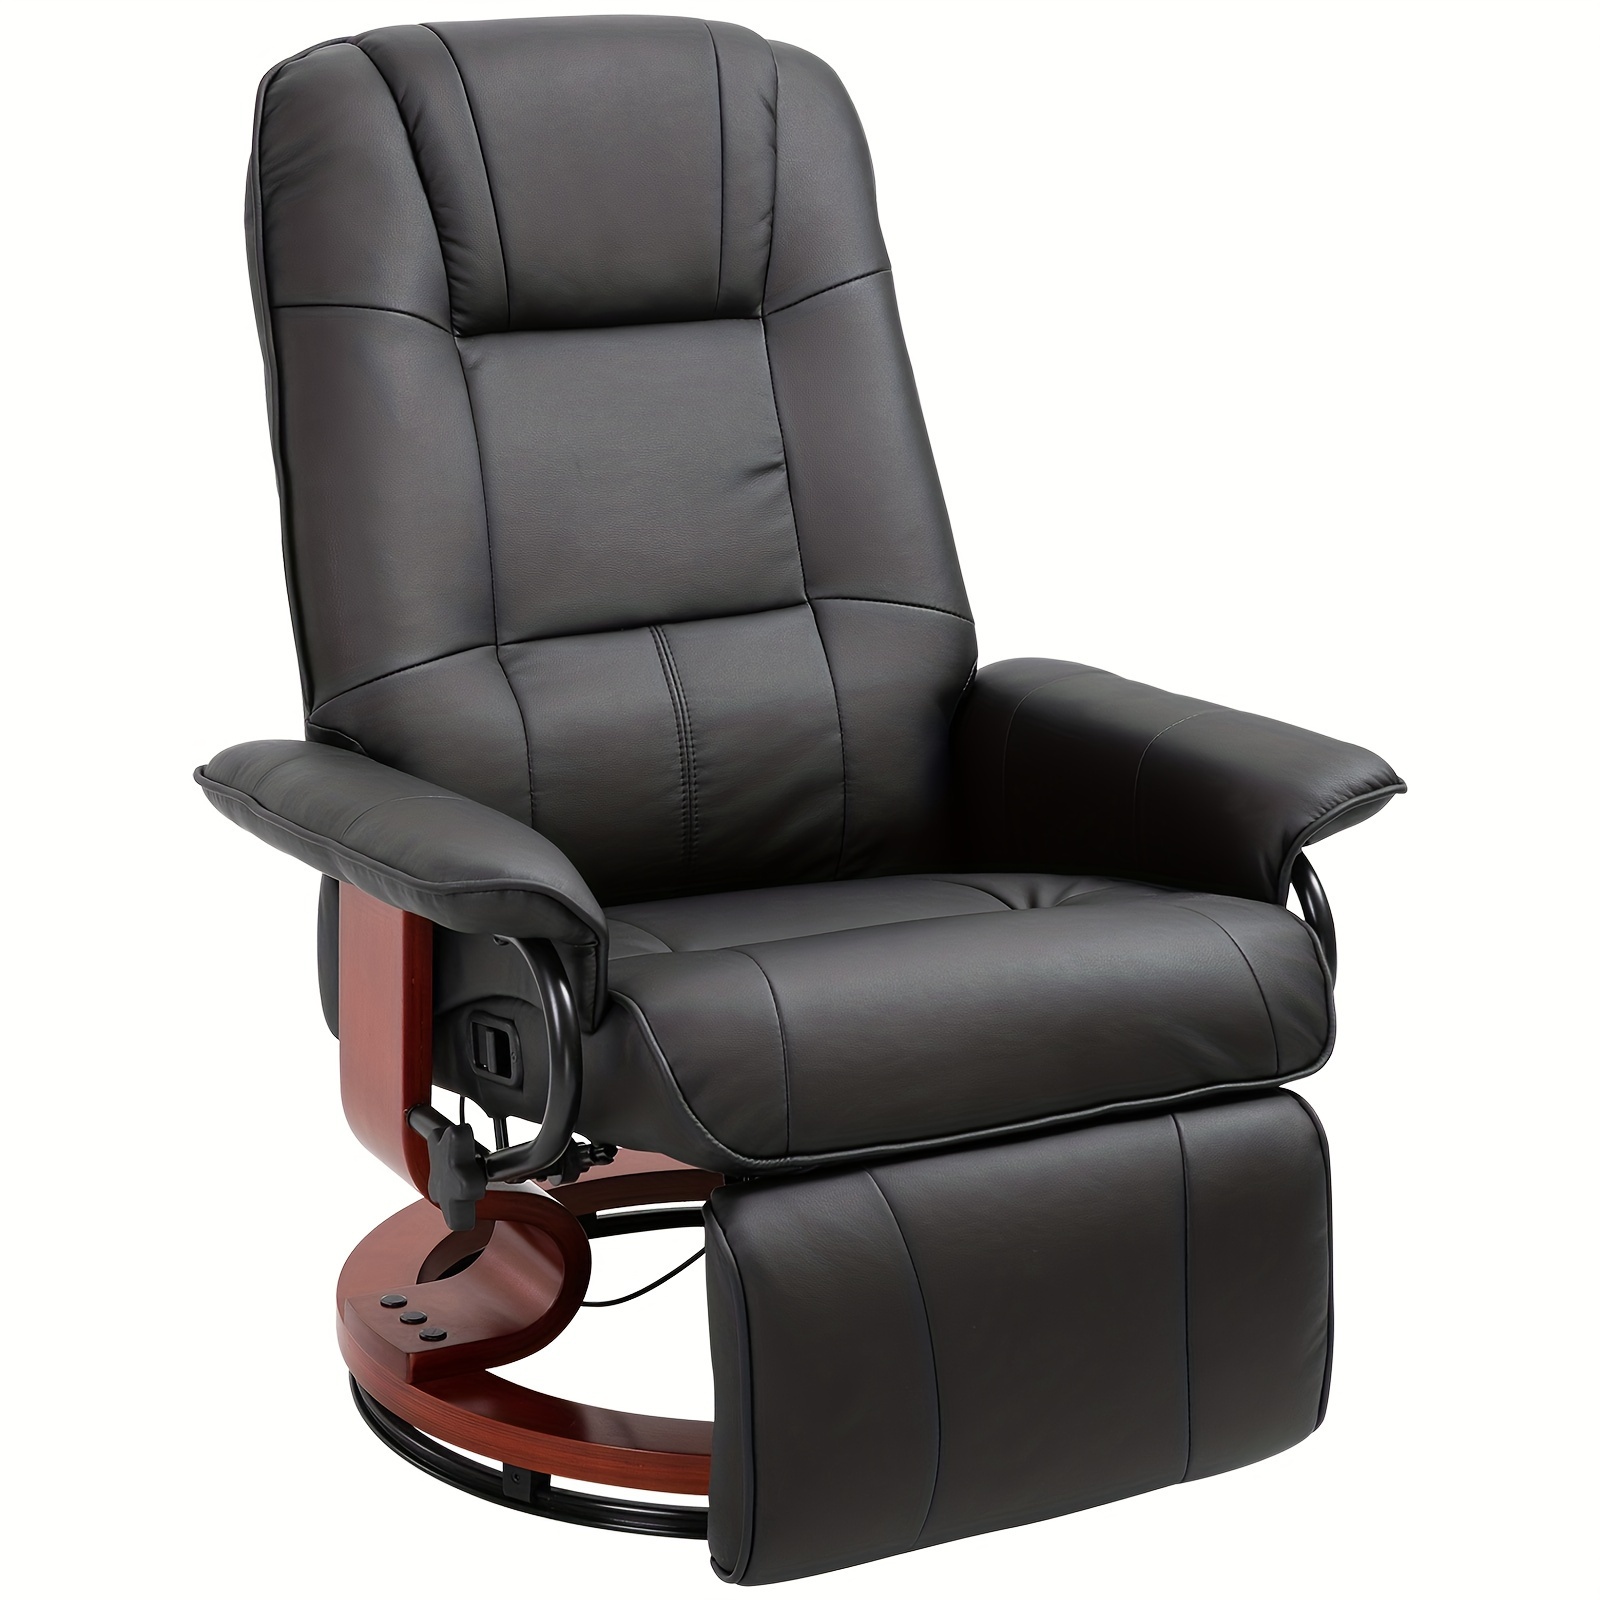 

Homcom Faux Leather Manual Recliner, Adjustable Swivel Lounge Chair With Footrest, Armrest And Wrapped Wood Base For Living Room, Black